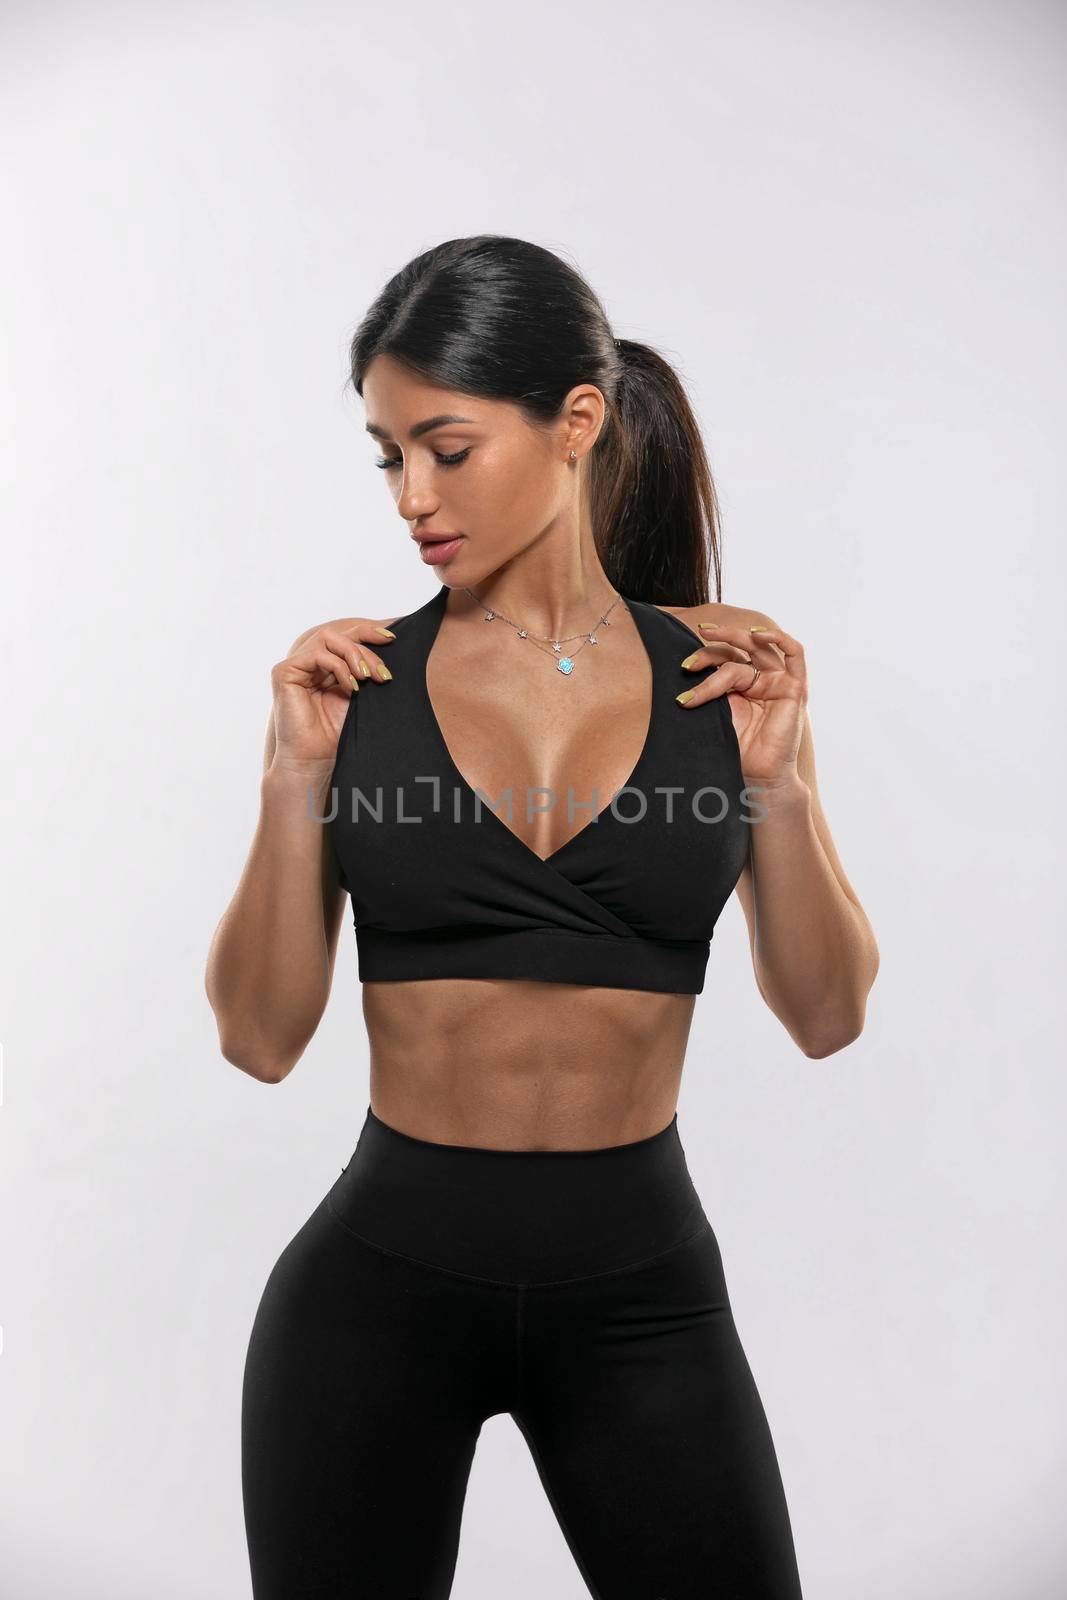 girl in black leggings and a top on a white background by but_photo